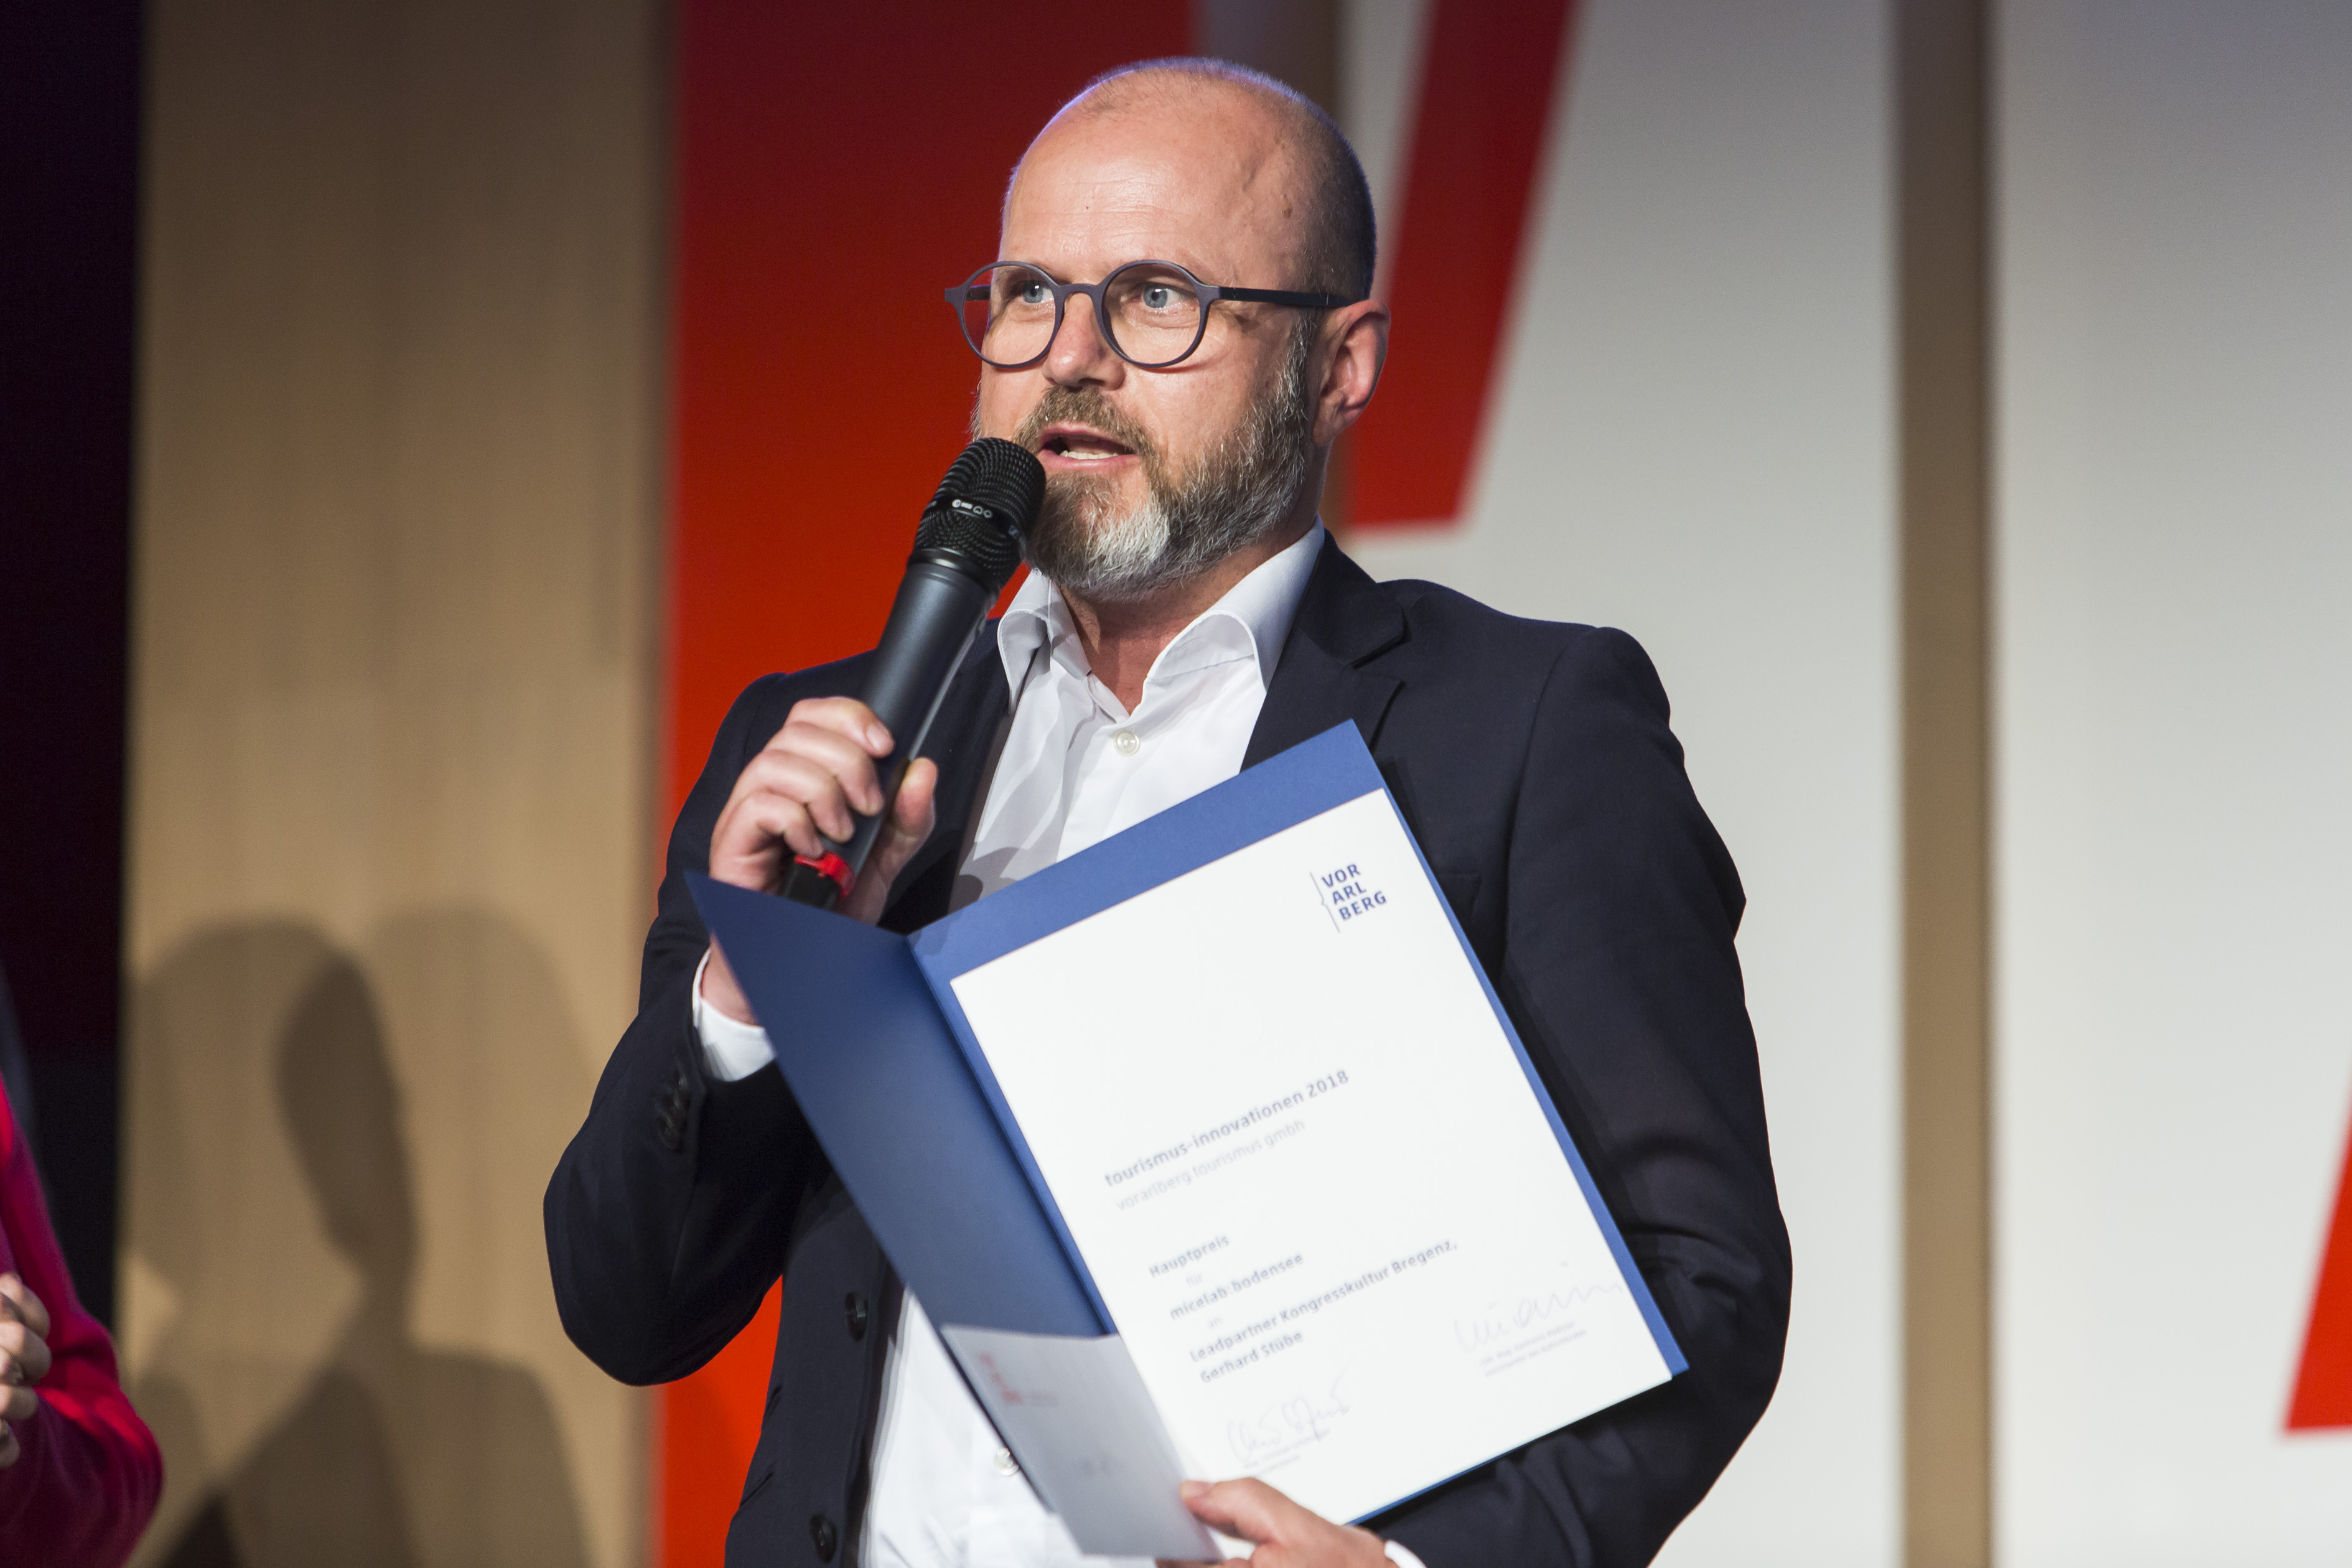 micelab:bodensee wins main prize for tourism innovation in 2018 in Vorarlberg